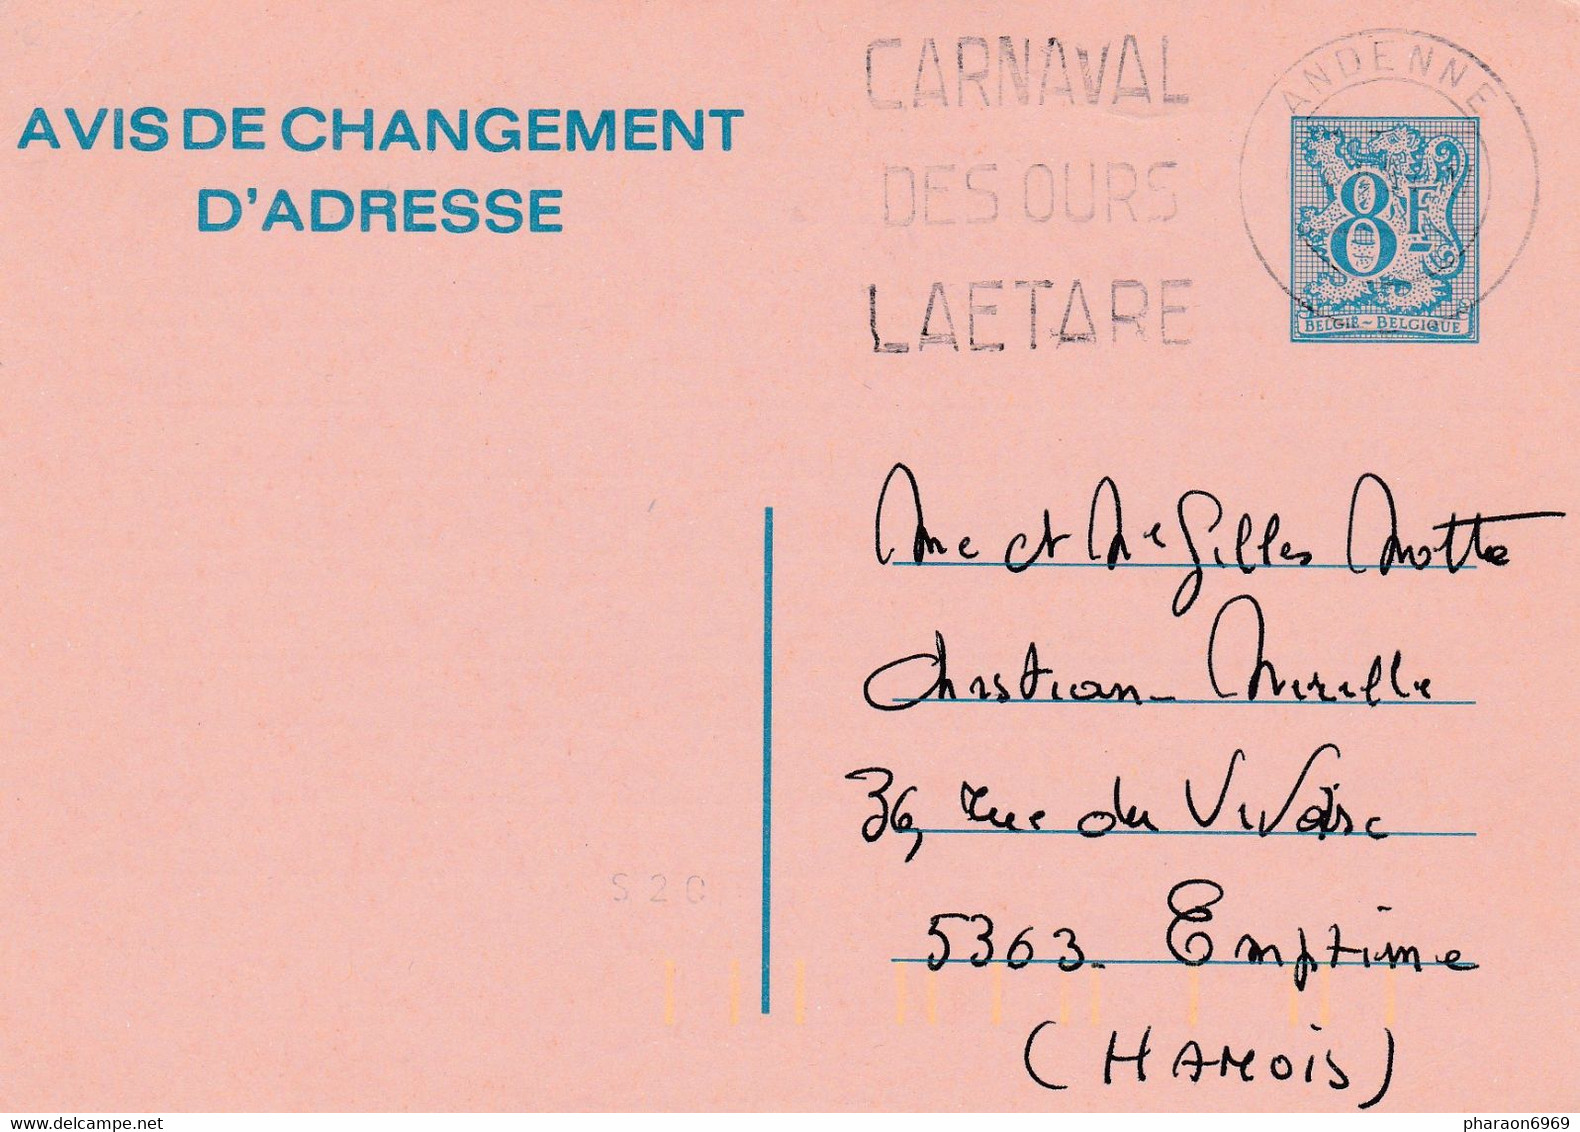 Carte Entier Postal Avis Changement D'adresse Flamme Carnaval Des Ours Laetare Andenne - Avviso Cambiamento Indirizzo